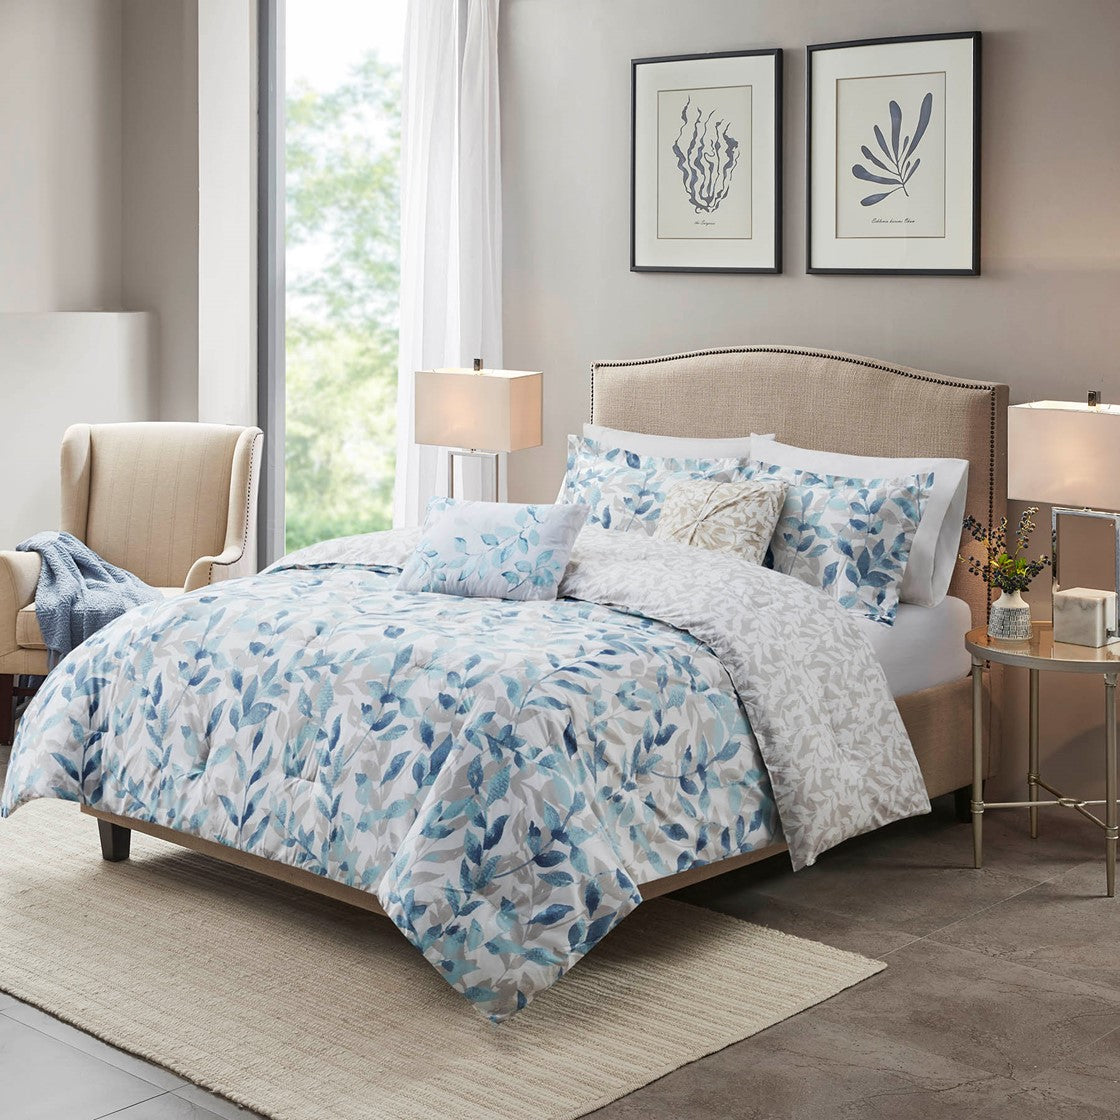 Madison Park Essentials Sofia Comforter Set with Two Decorative Pillows - Blue - Queen Size